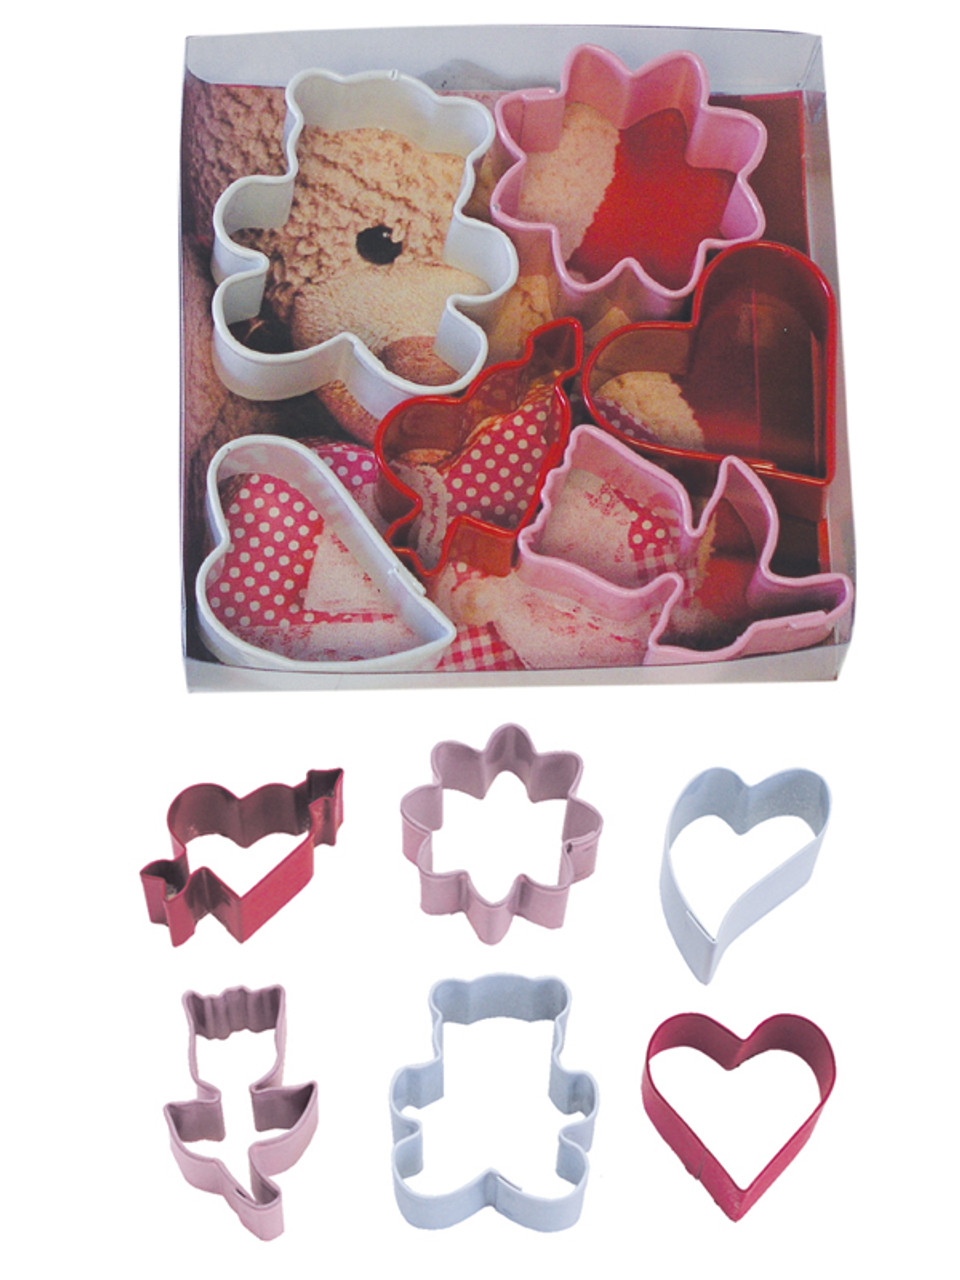 FAZHBARY 6 Counts Heart Cookie Cutter Set Small Metal Valentine's Day Cookie Cutters Heart Shaped Cookie Candy Food Mold Cutters